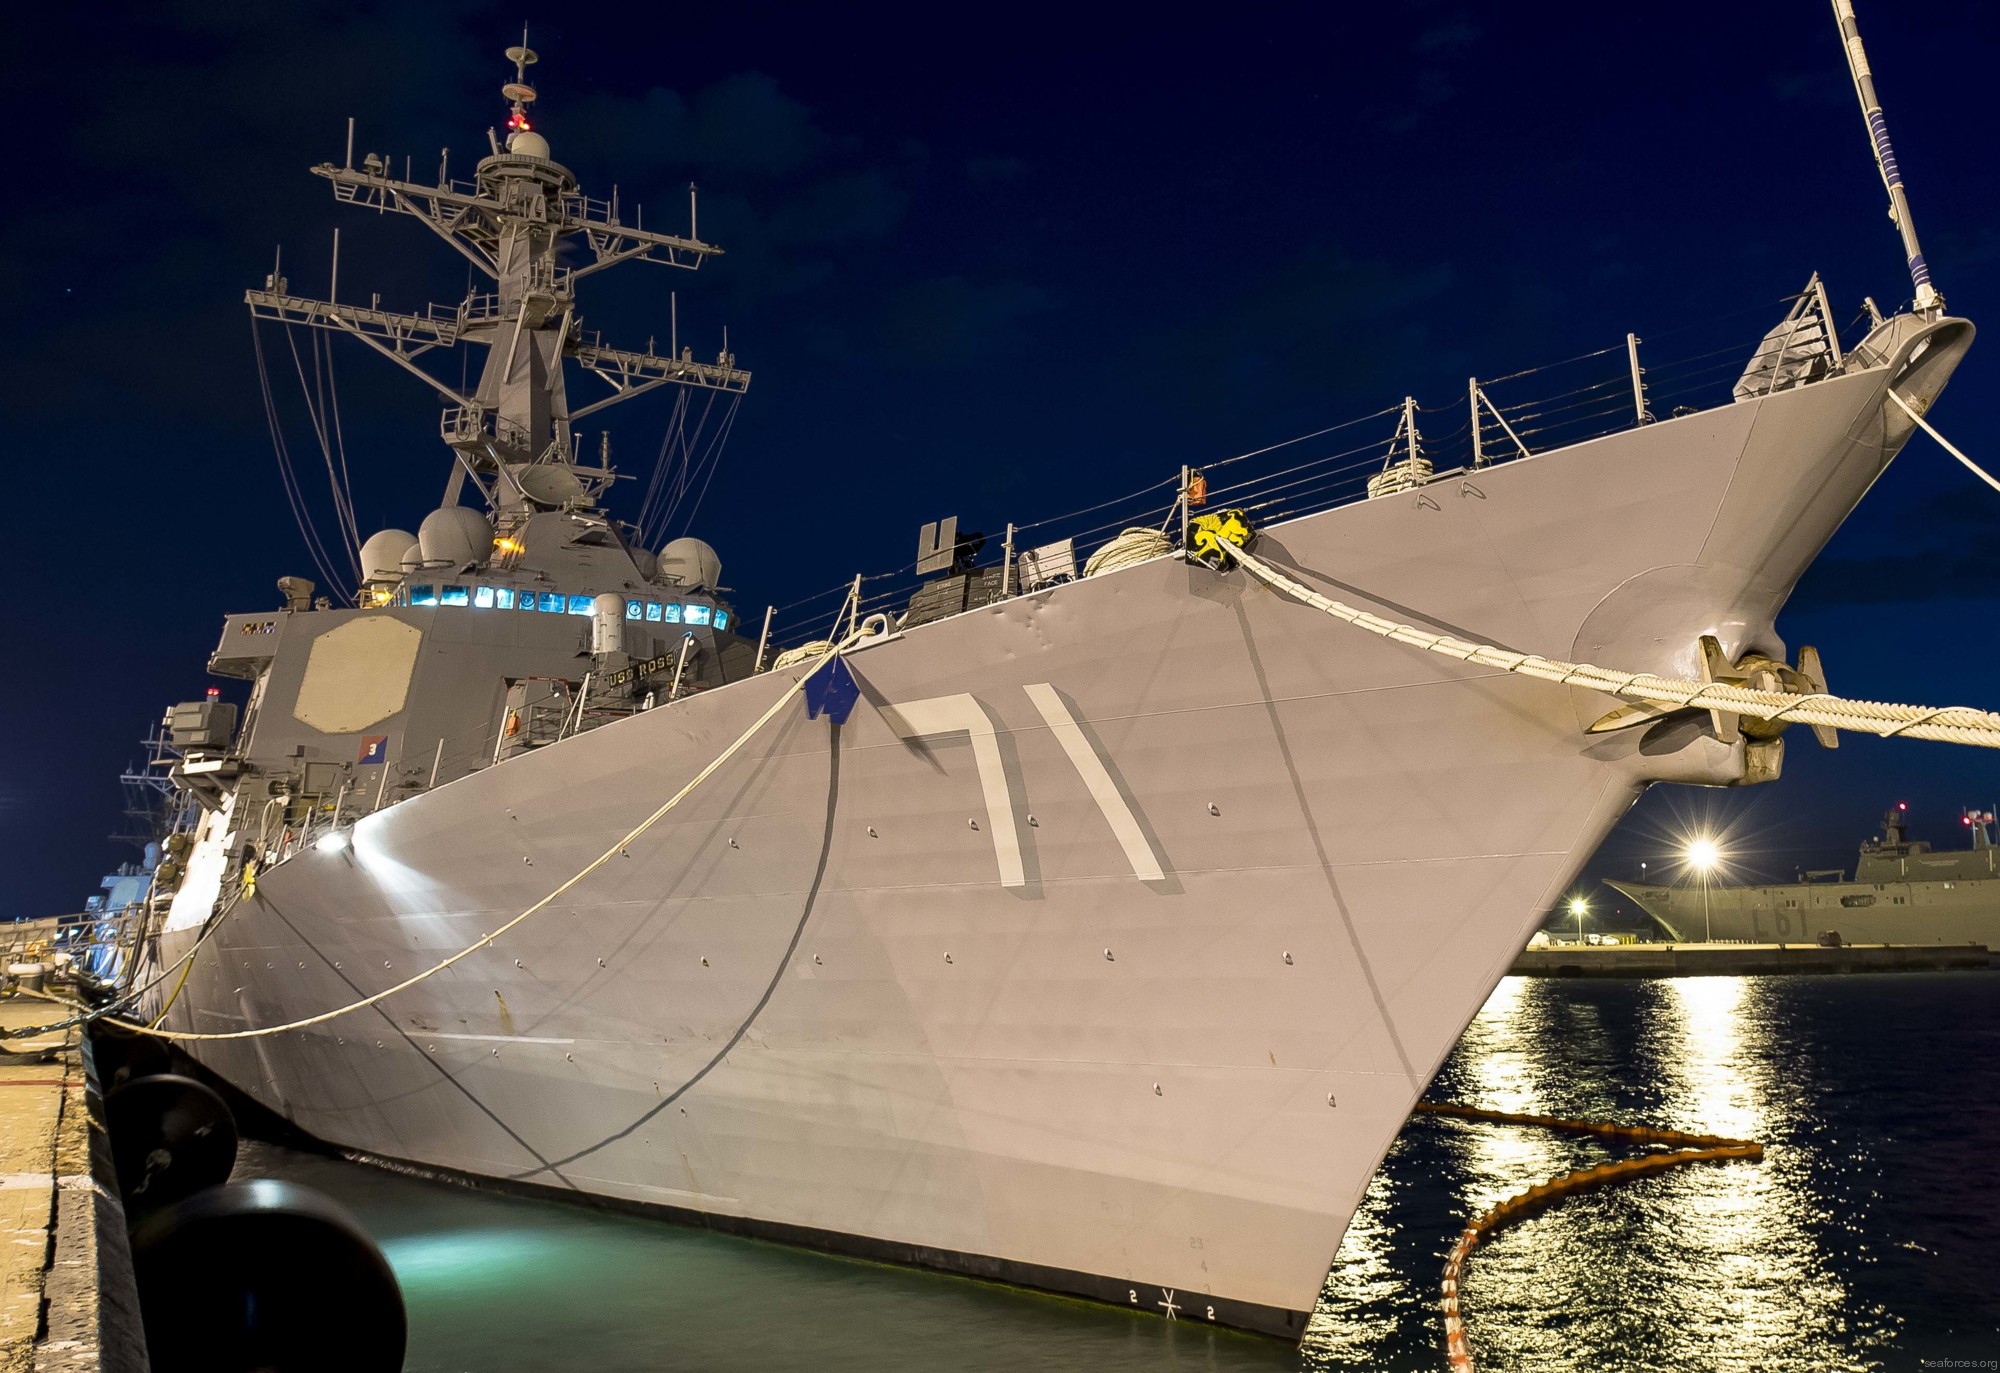 ddg-71 uss ross guided missile destroyer arleigh burke class aegis bmd 52